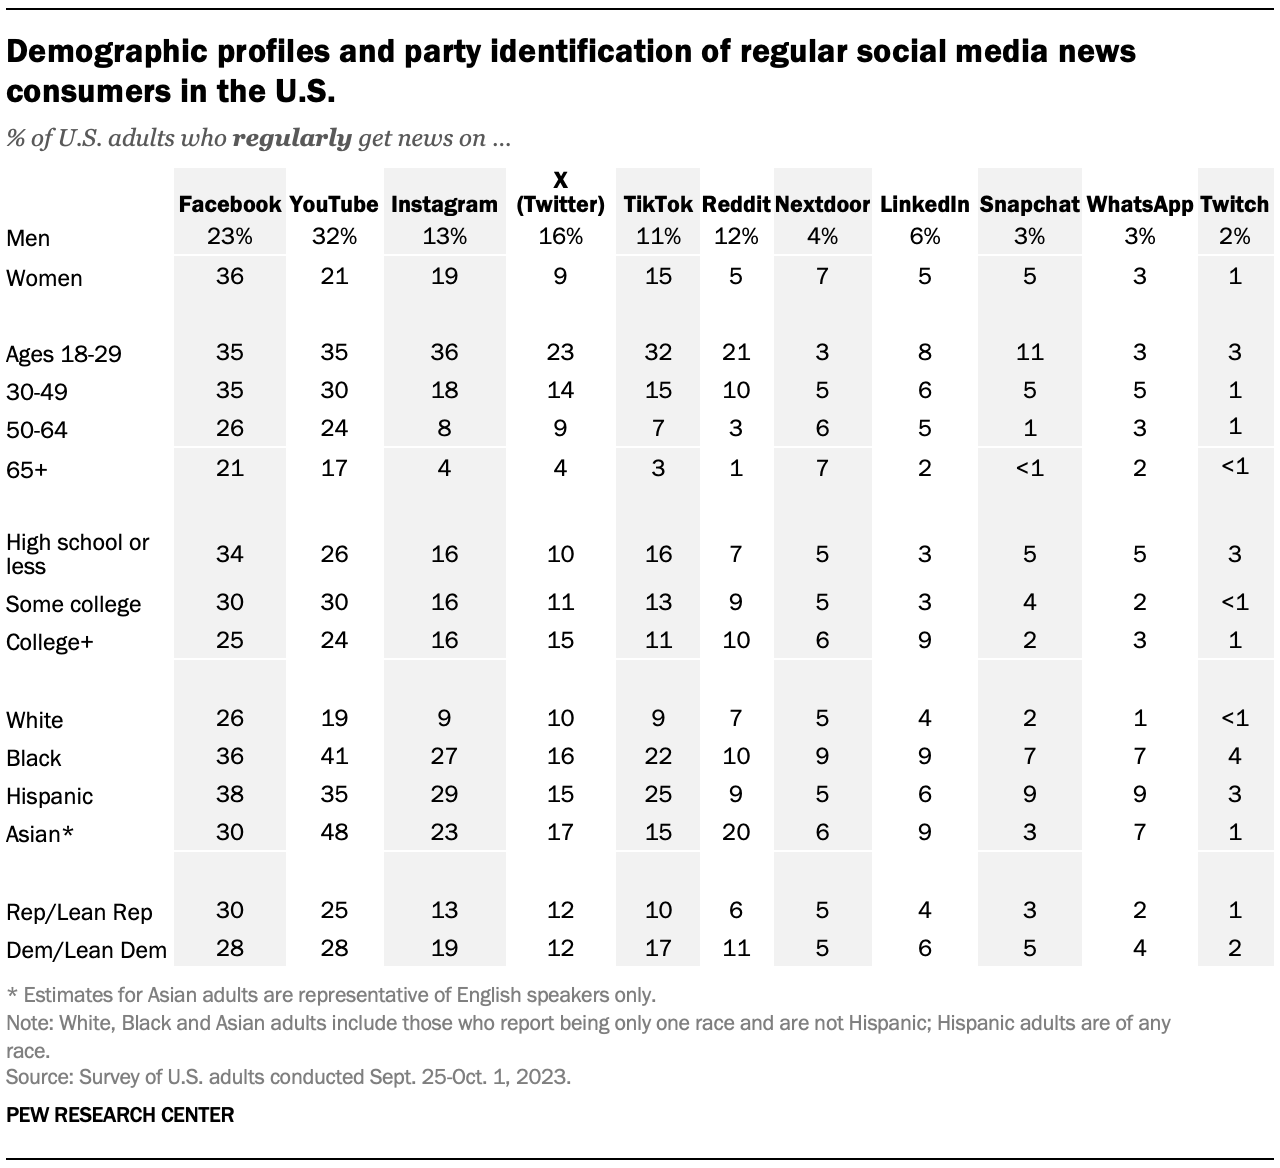 A table showing Demographic profiles and party identification of regular social media news consumers in the U.S.